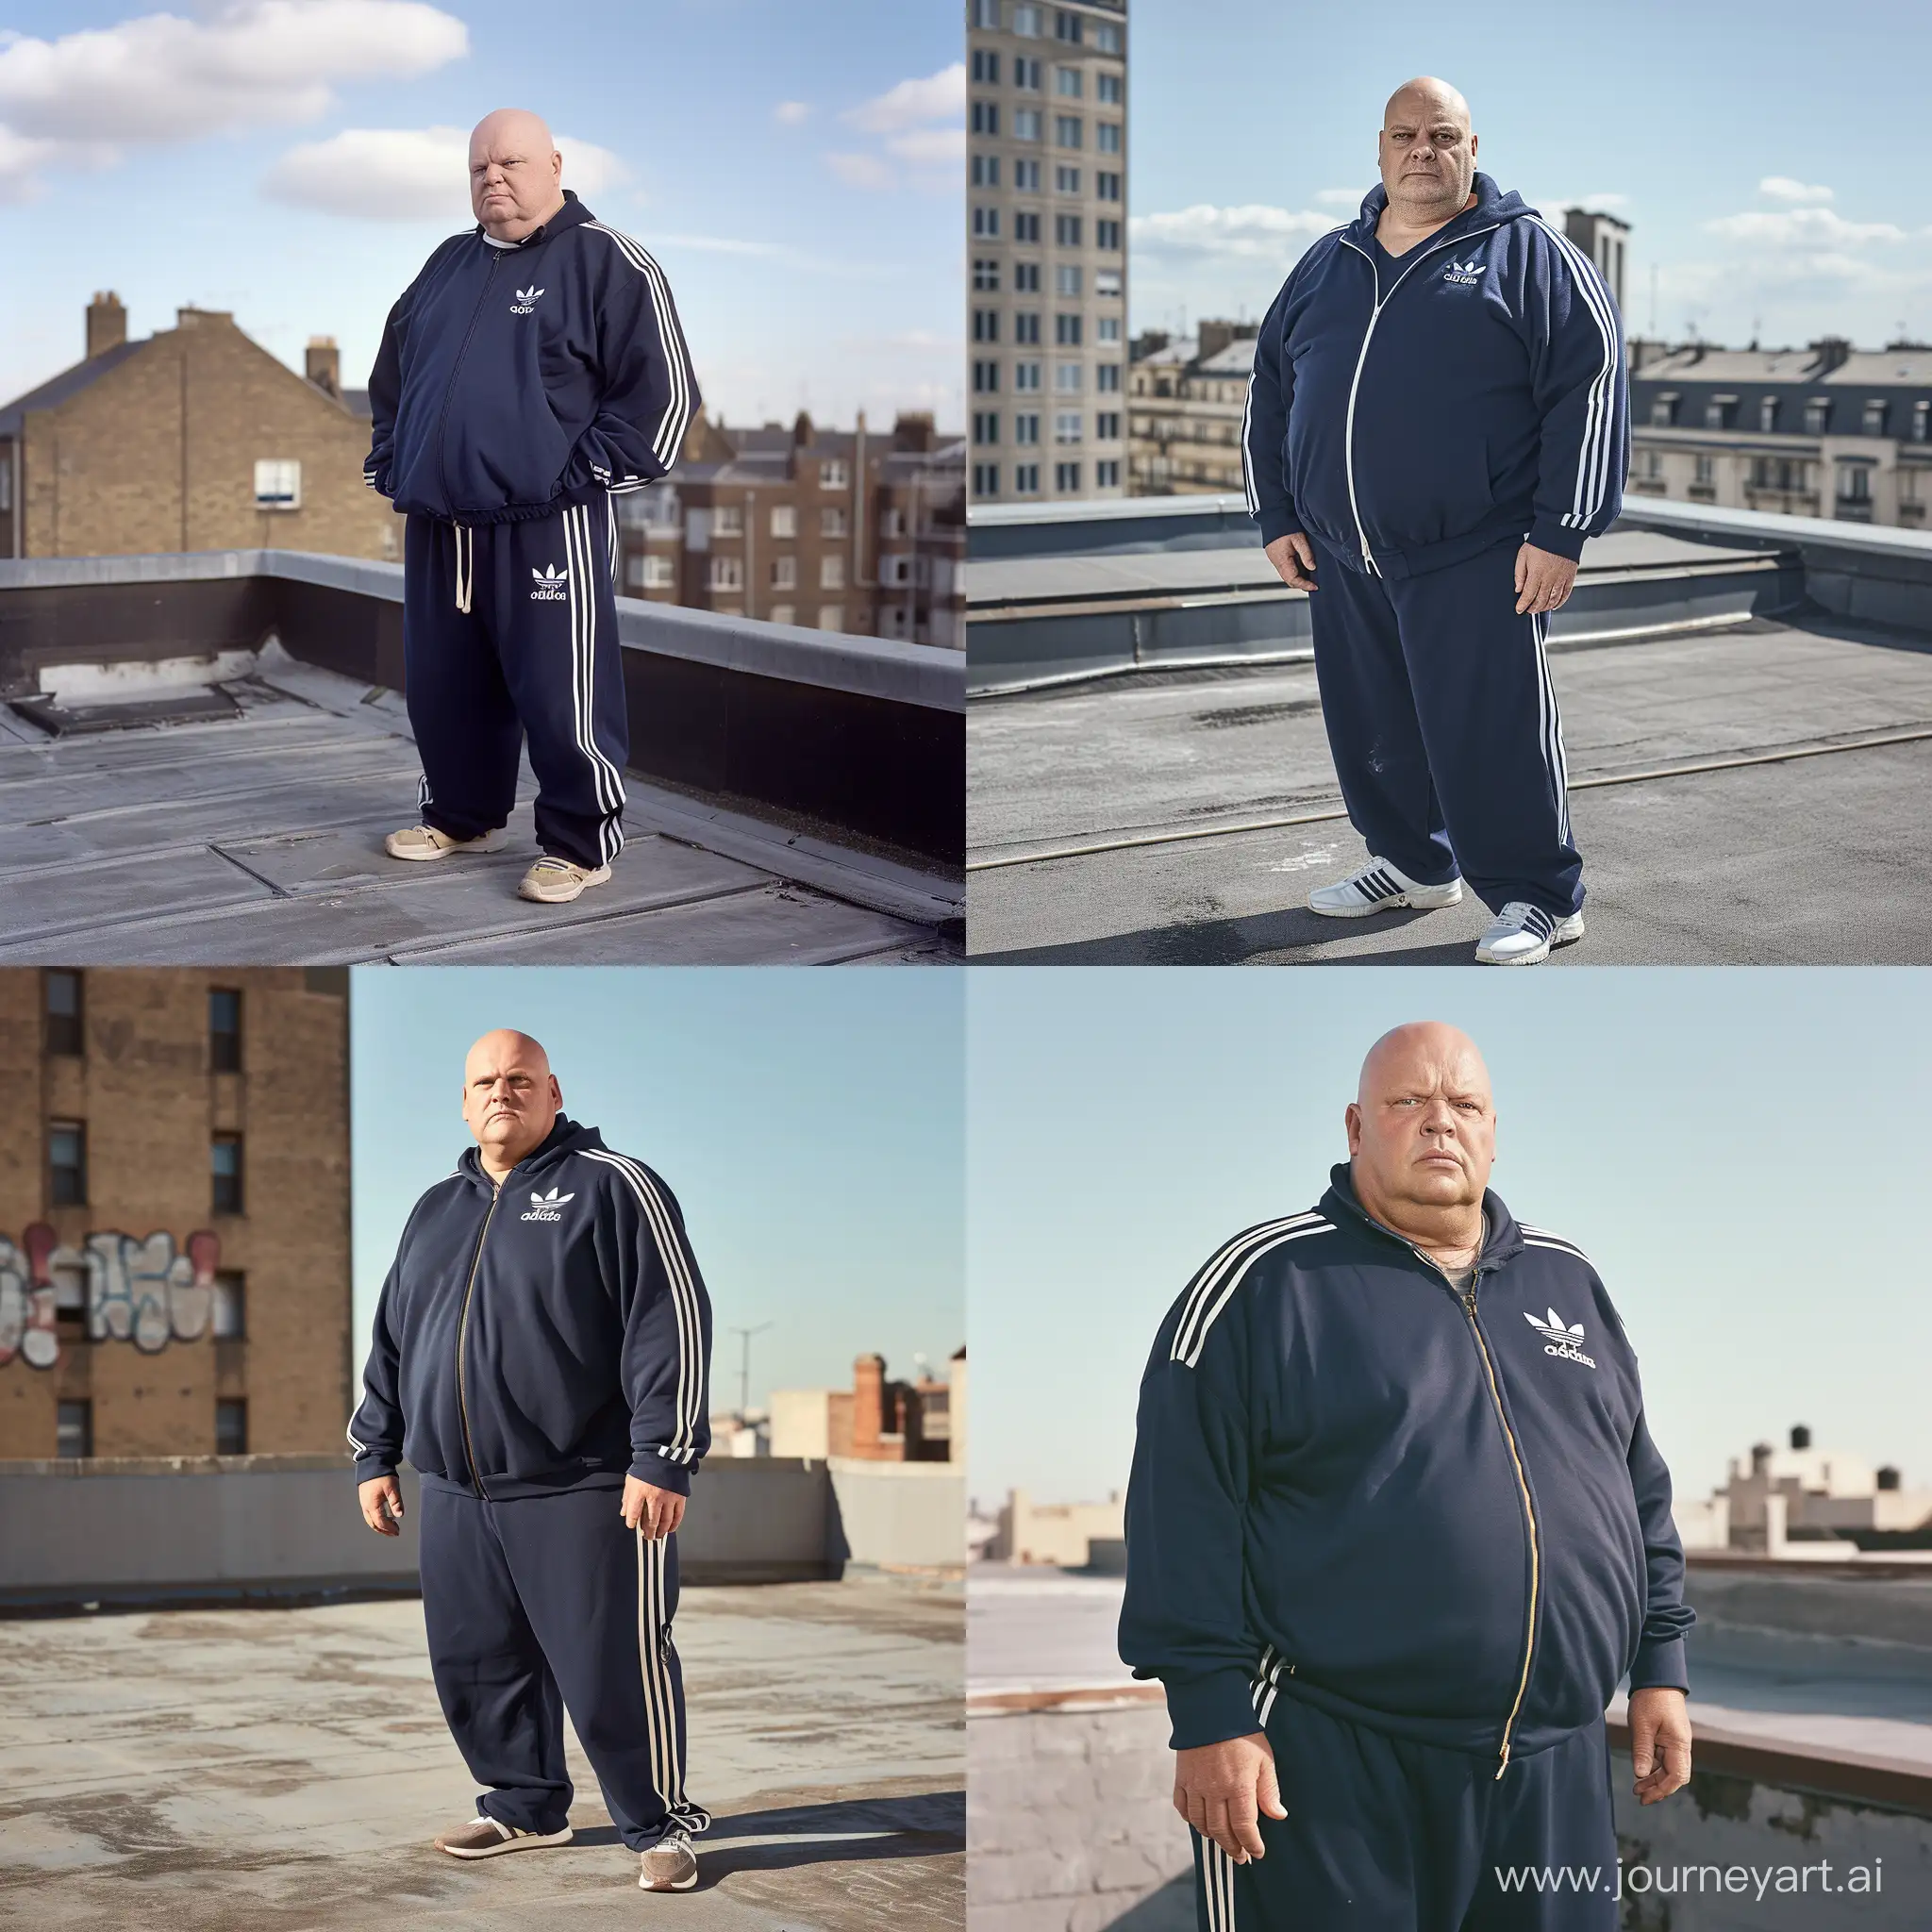 overweight man aged 70 wearing a navy adidas tracksuit, rooftop, daylight, clean shaven, bald --v 6